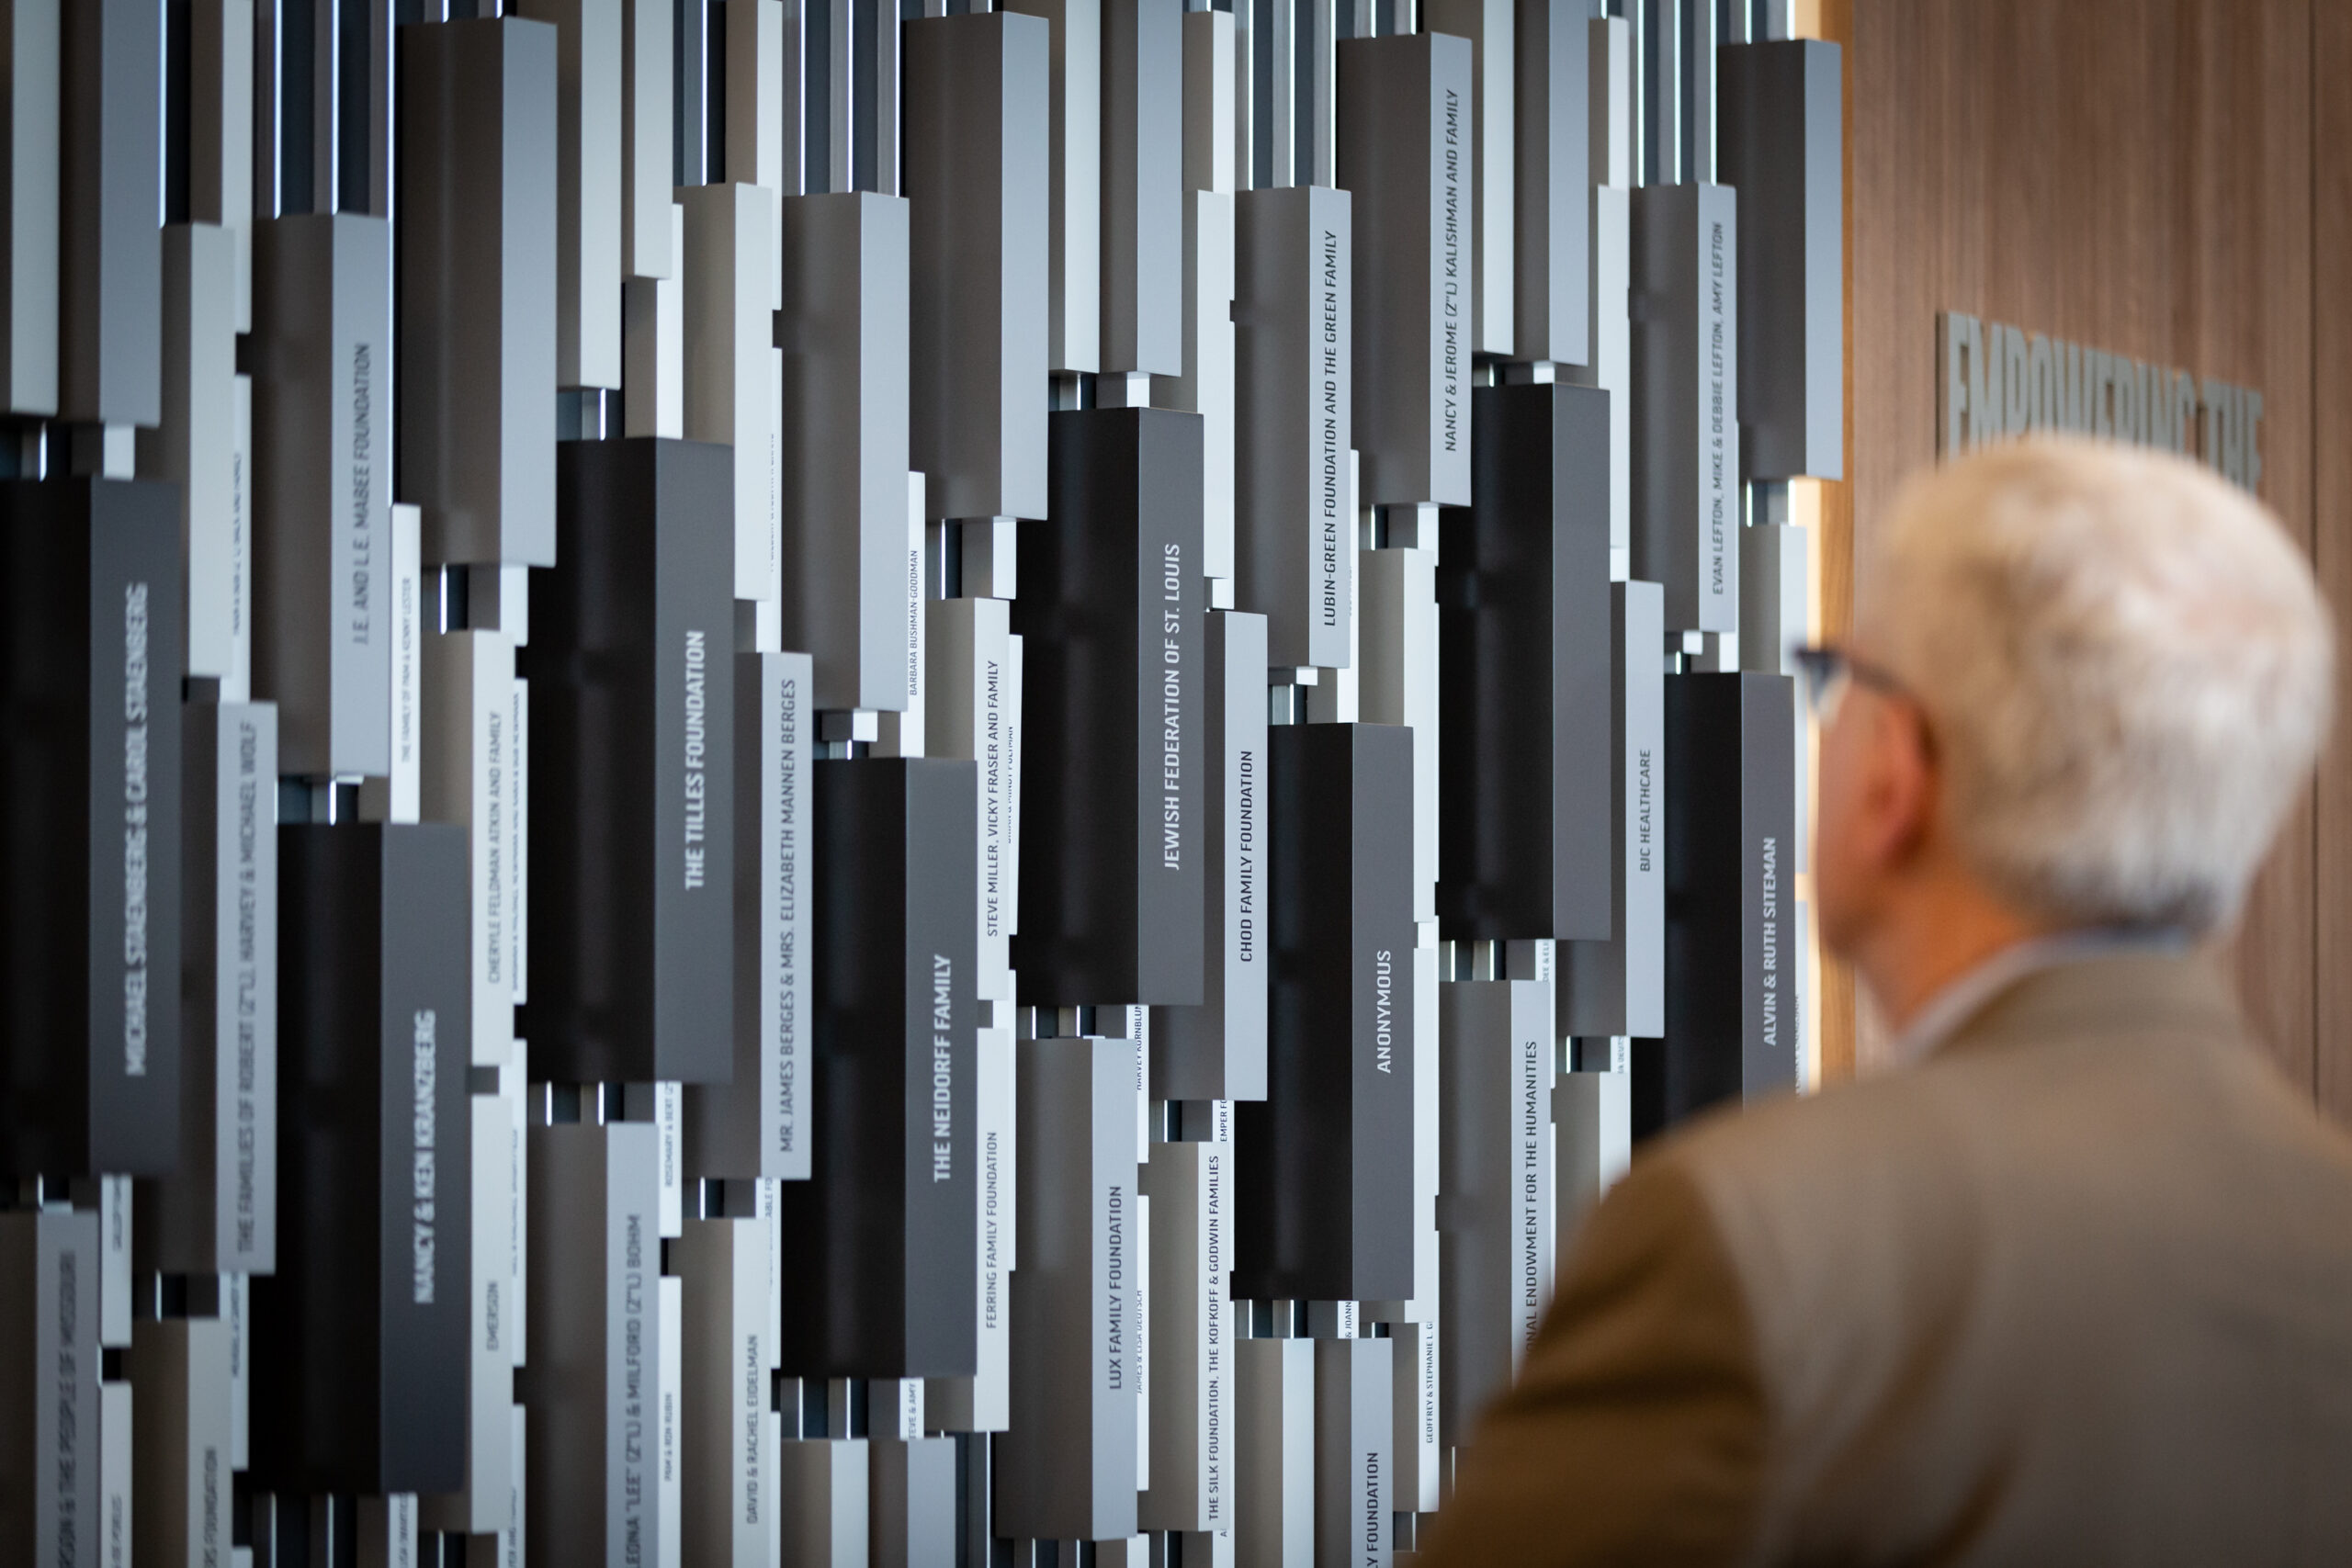 Man in suit looks at the Museum's donor wall in the Museum lobby.